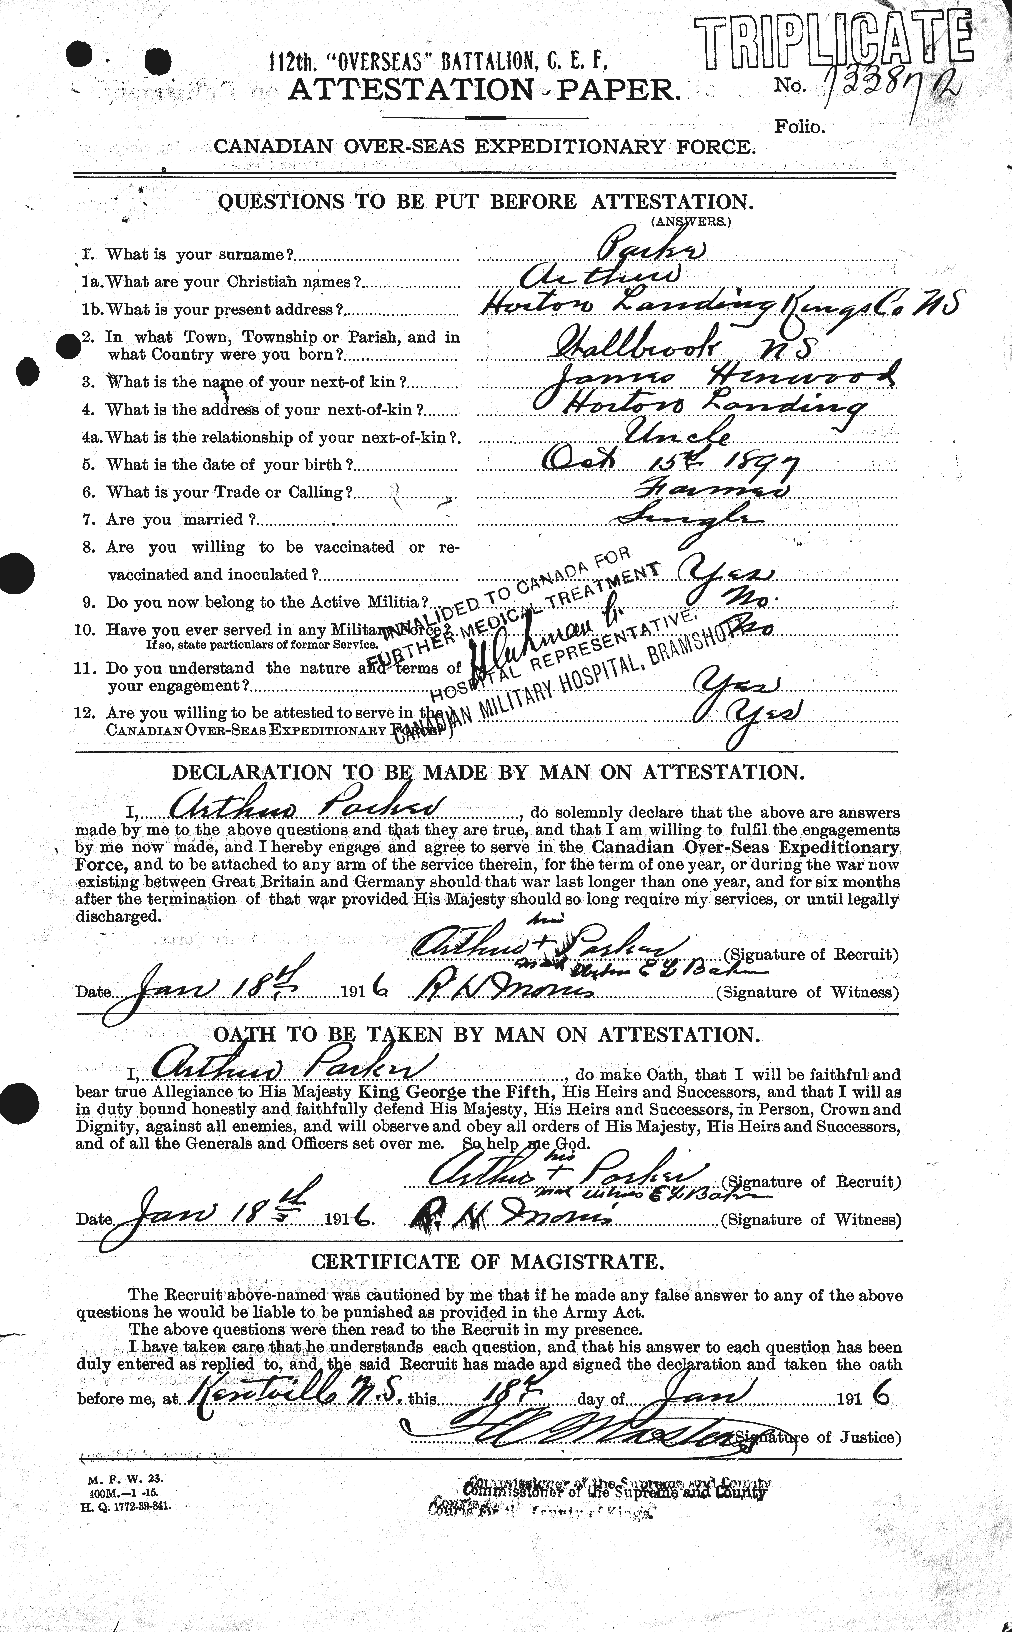 Personnel Records of the First World War - CEF 565013a